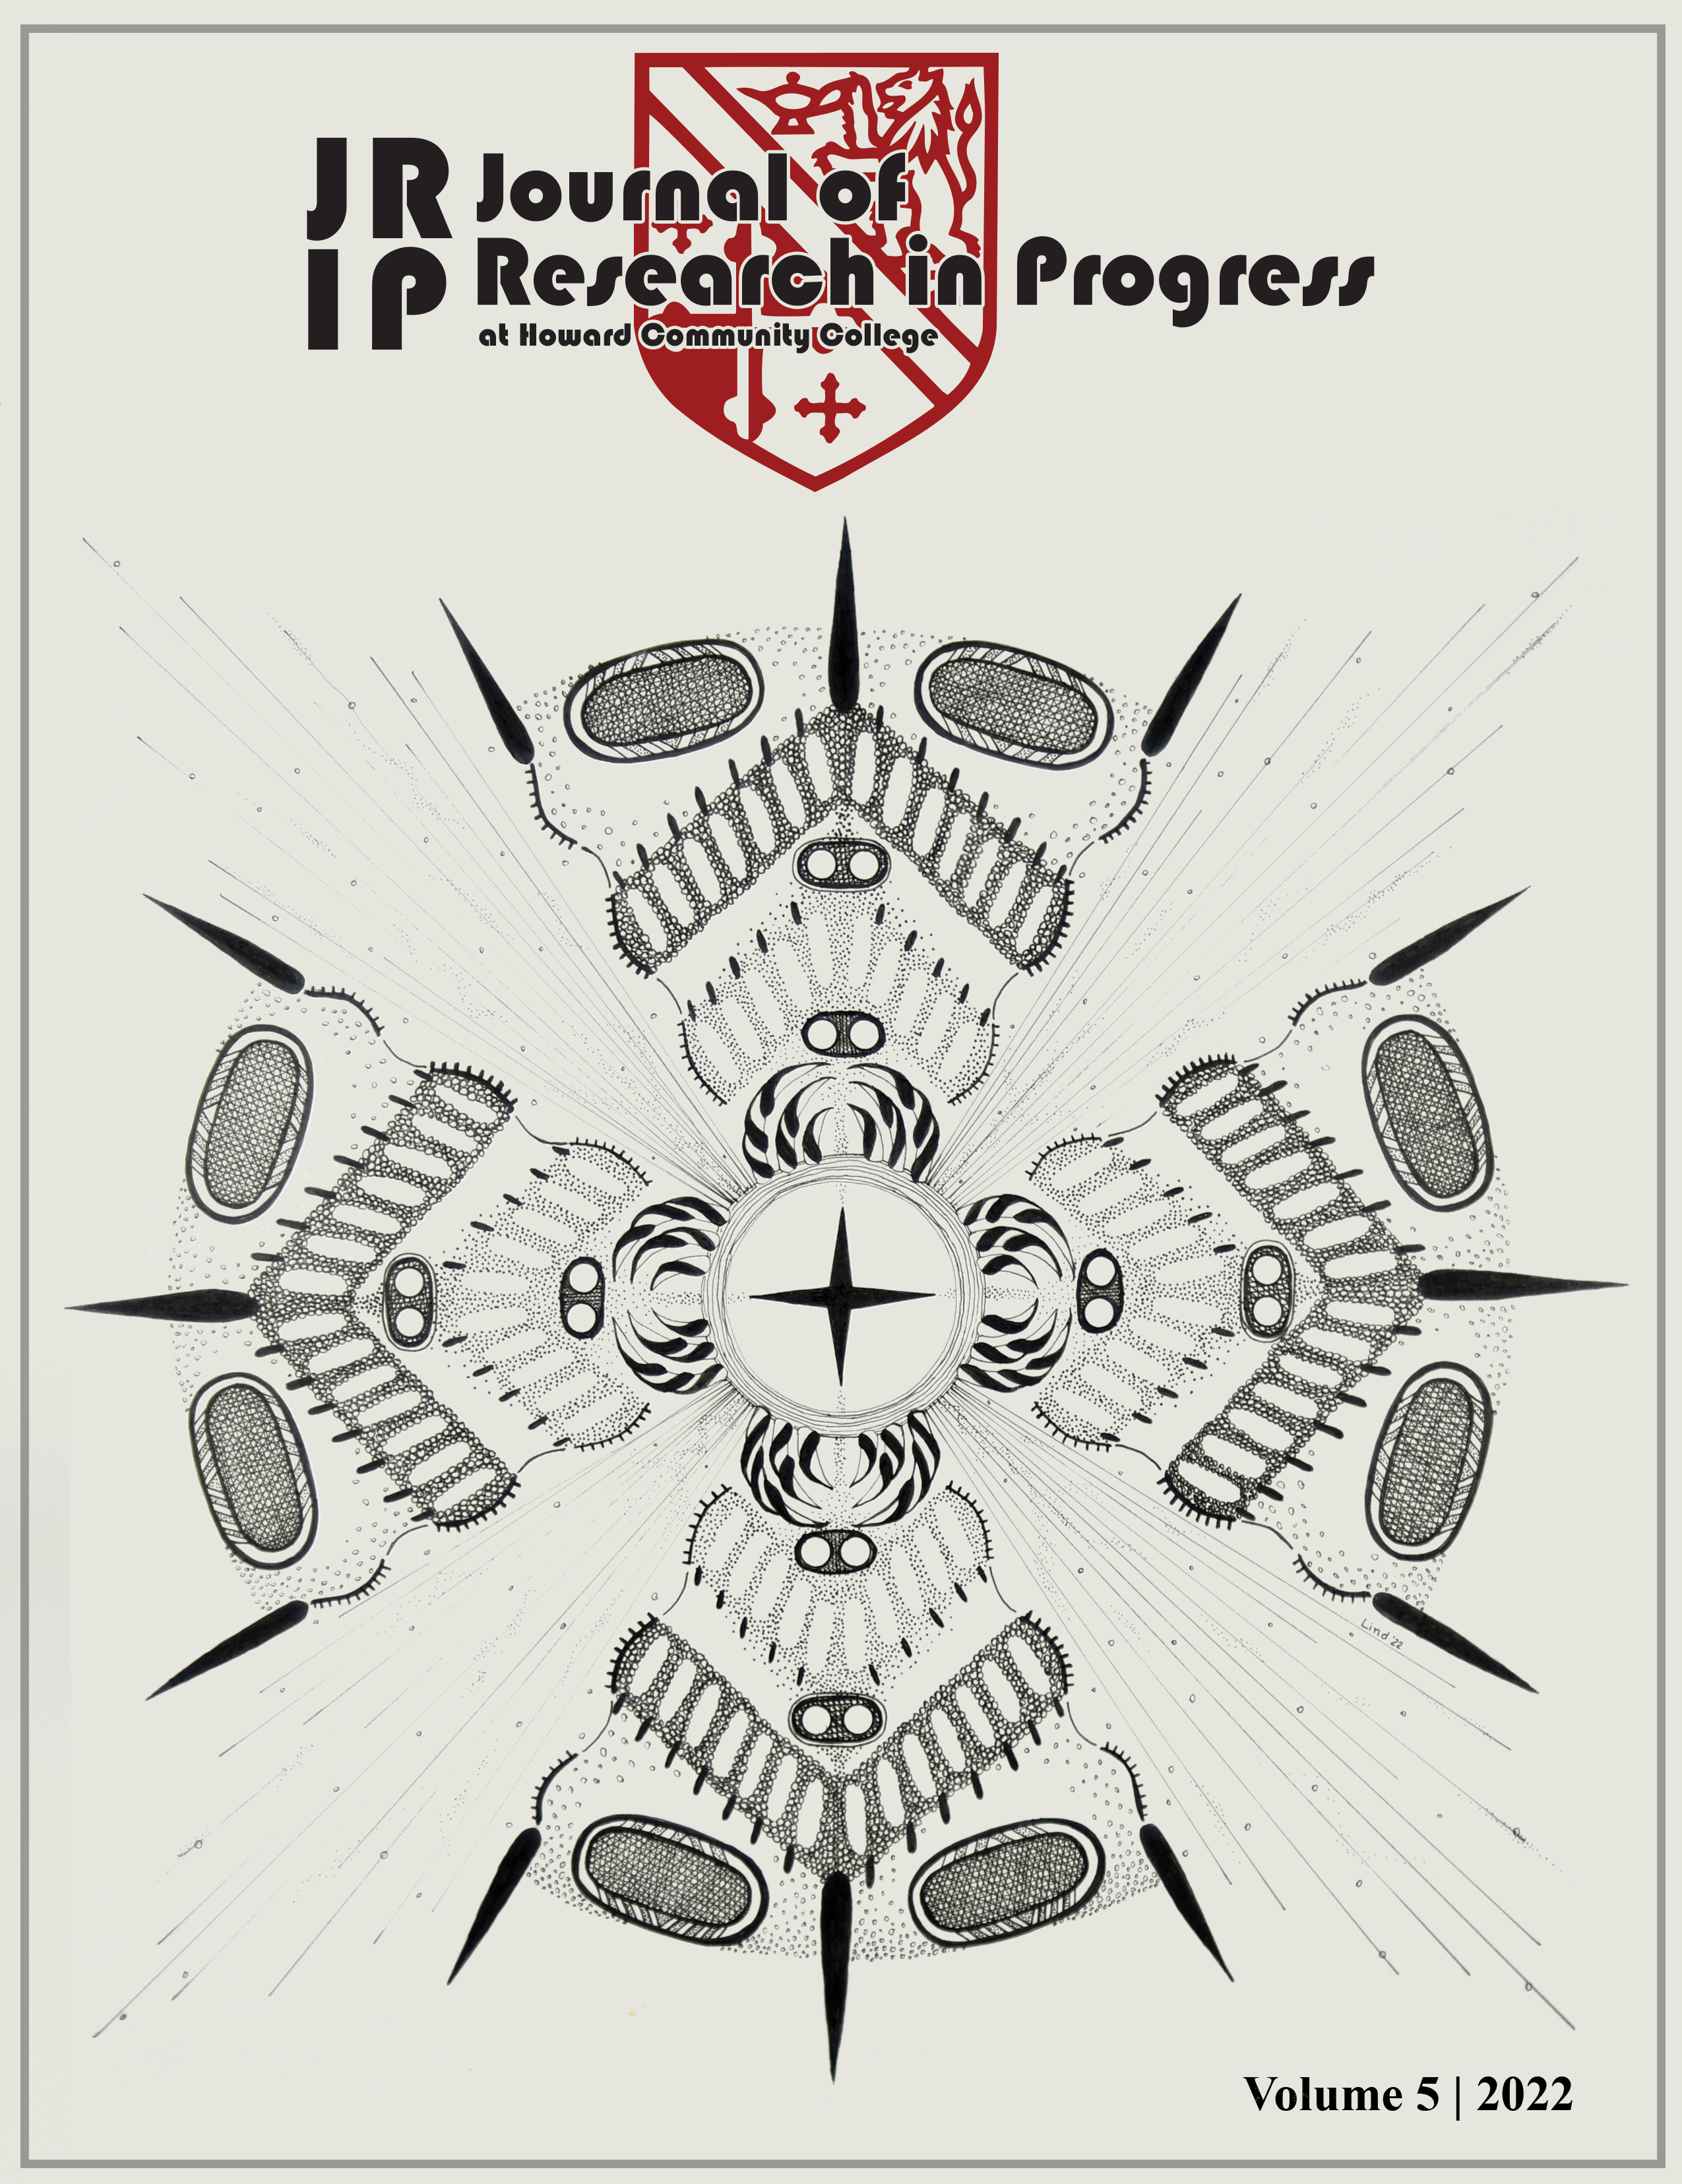 Journal of Research in Progress Volume 5 2022 Front Cover